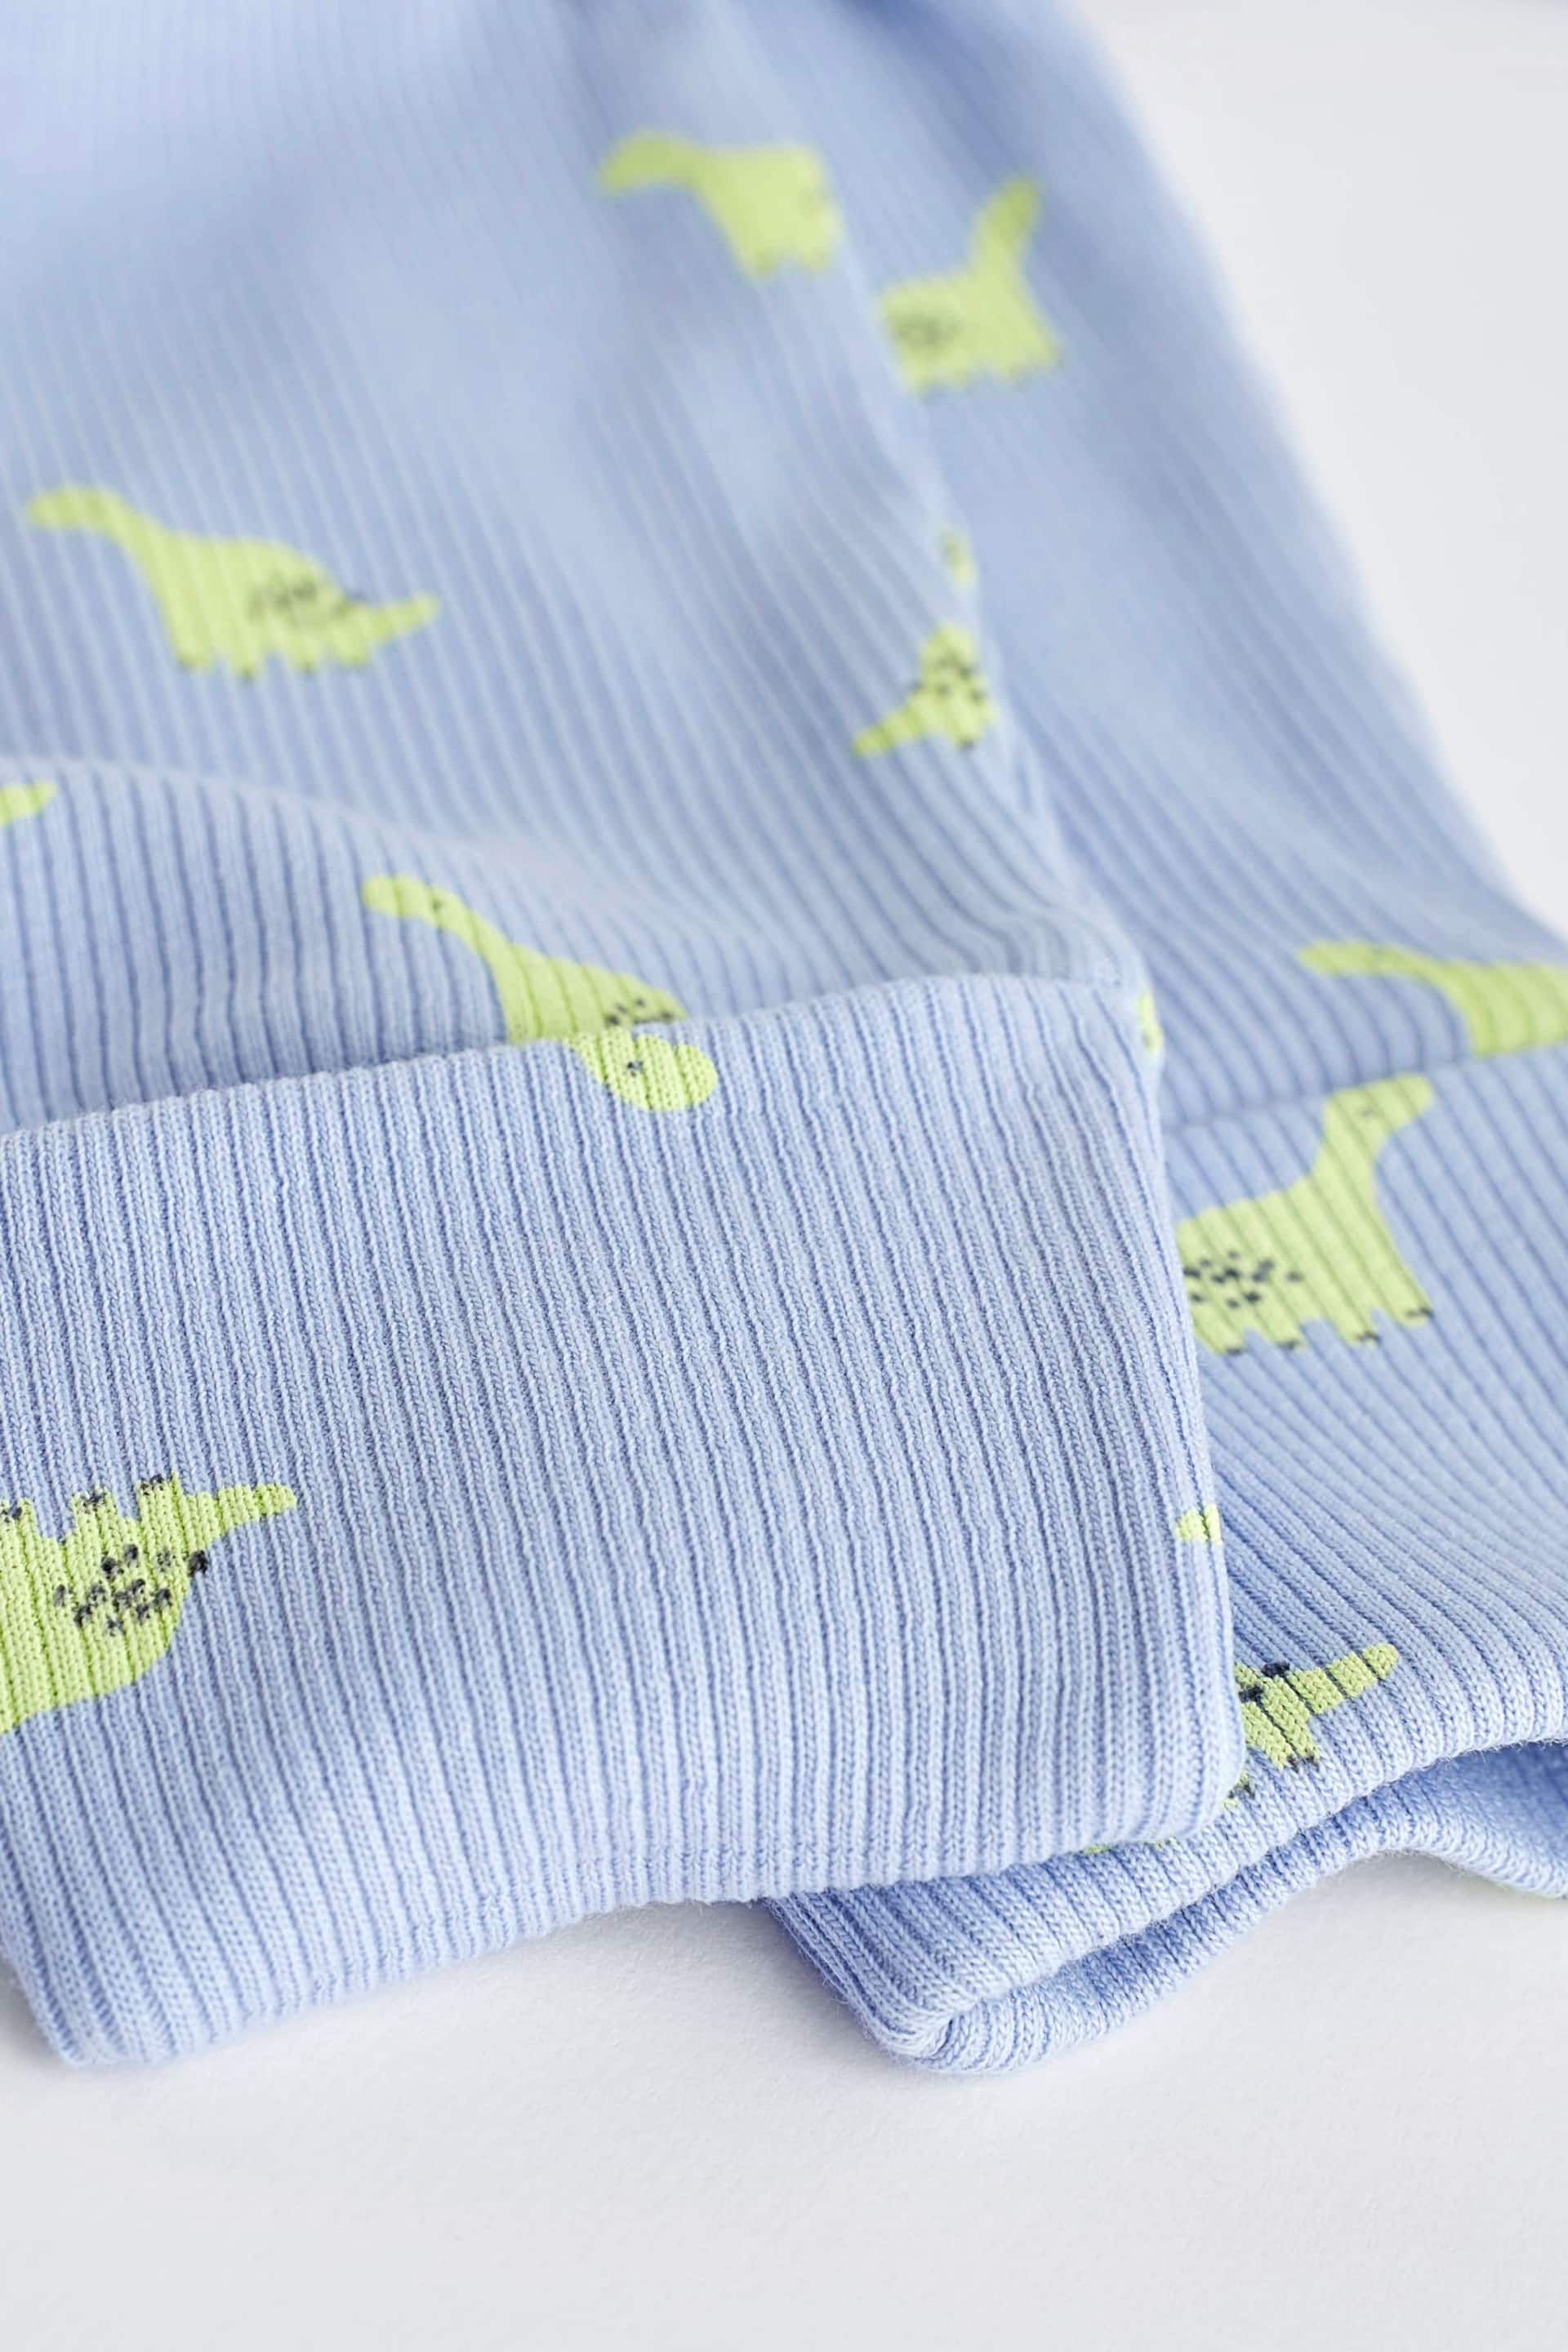 Bright Miniprint Dino Footless Baby Sleepsuit 3 Pack (0mths-3yrs) - Image 11 of 13